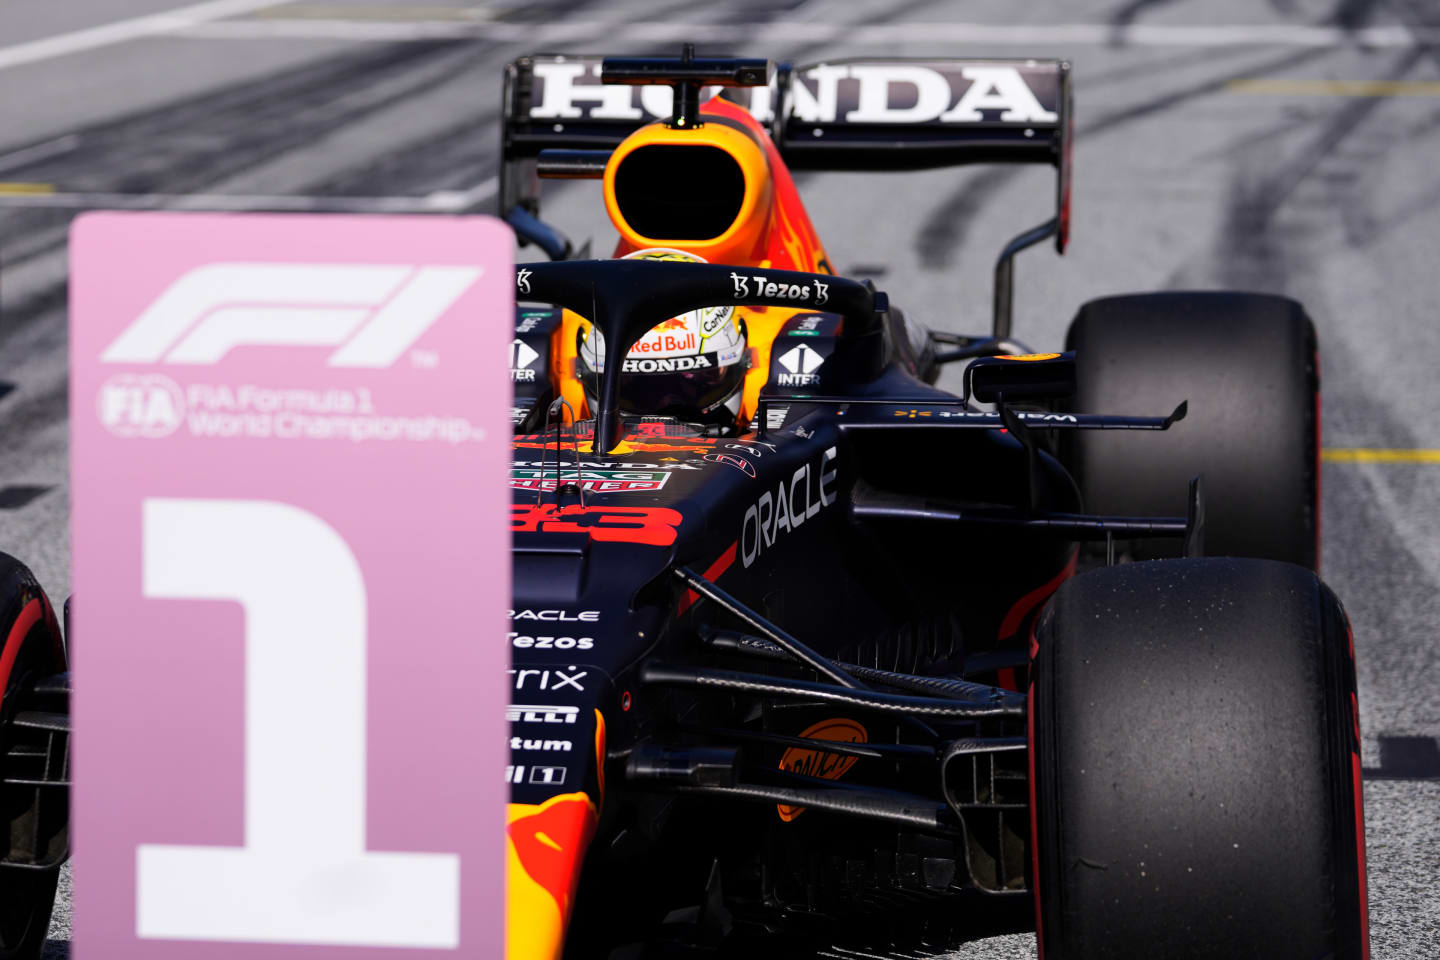 SPIELBERG, AUSTRIA - JUNE 26: Pole position qualifier Max Verstappen of Netherlands and Red Bull